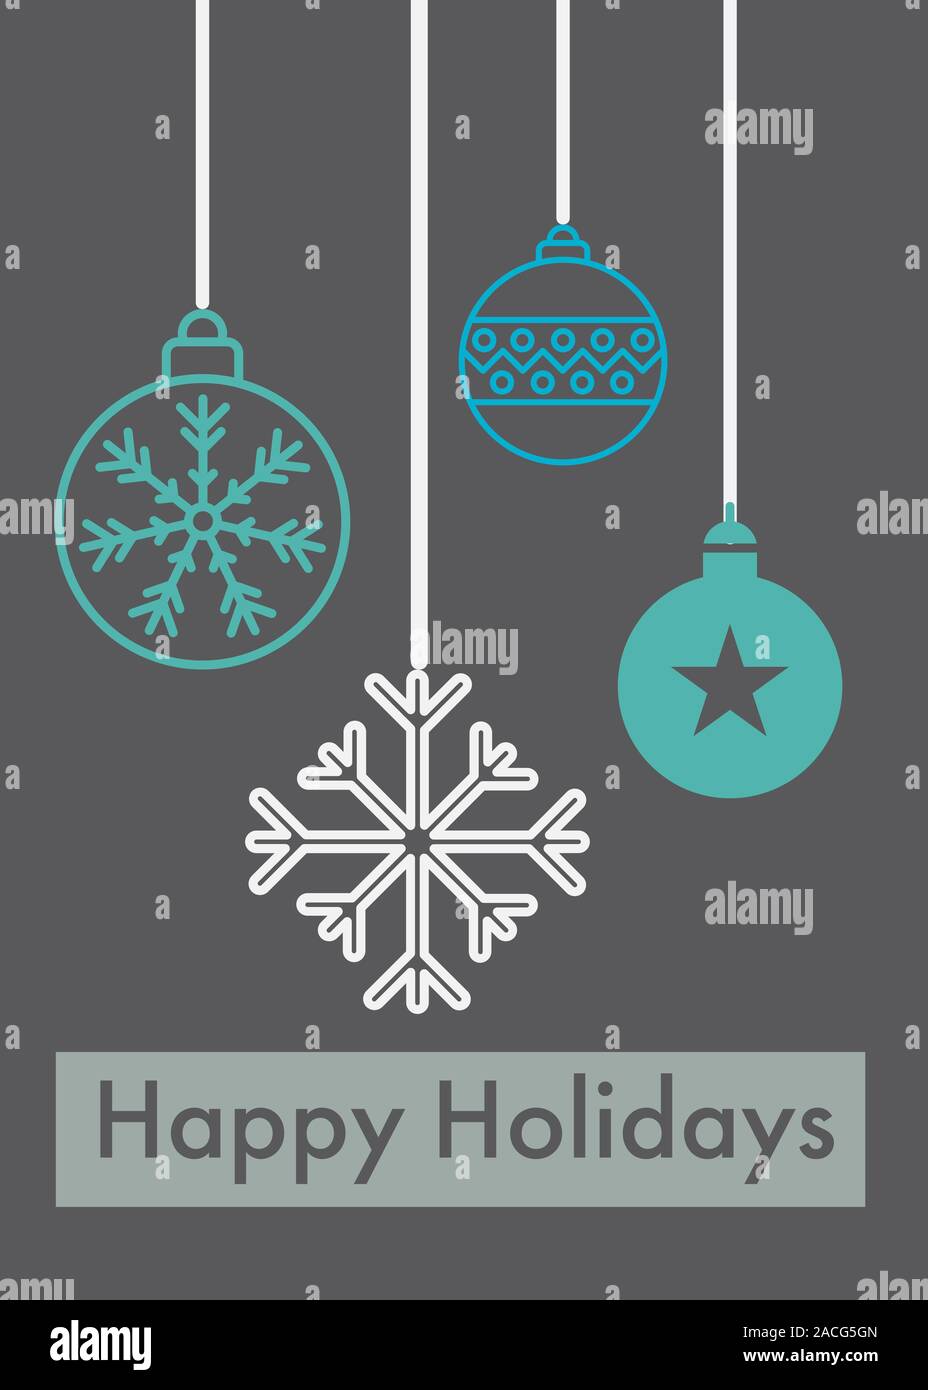 Grey and Teal Illustration Happy Holidays size 2 Stock Photo